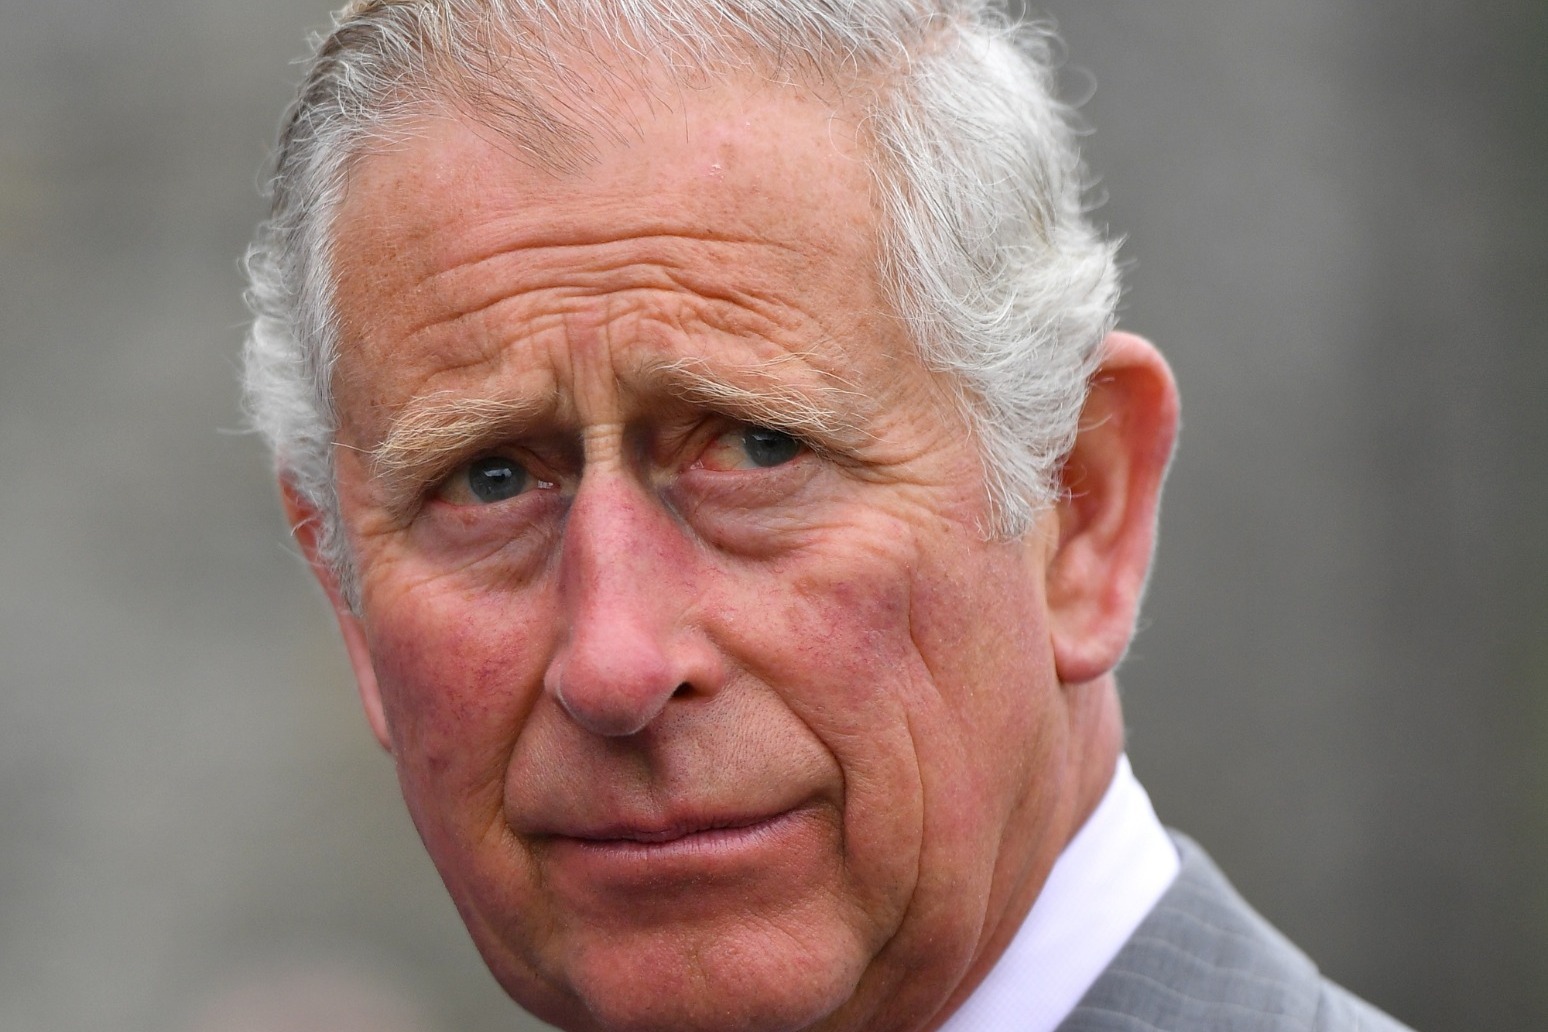 Charles ‘would never again’ handle large cash donations for his charities 